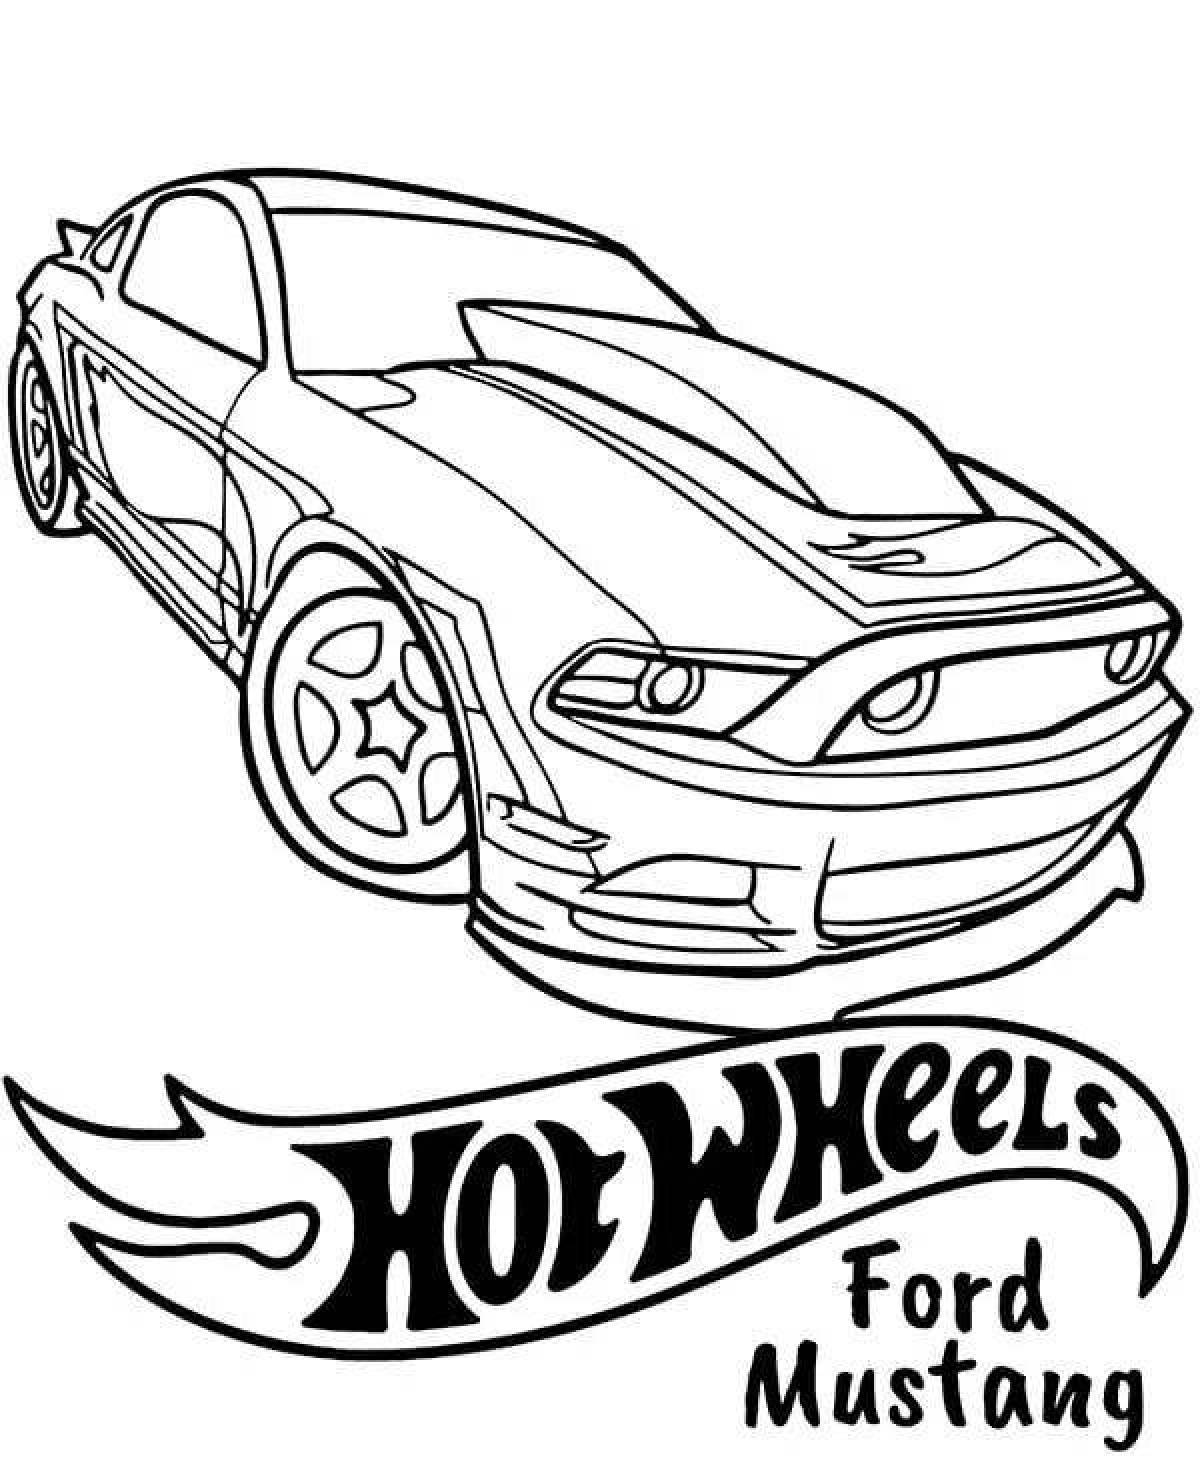 Coloring book grand ford mustang